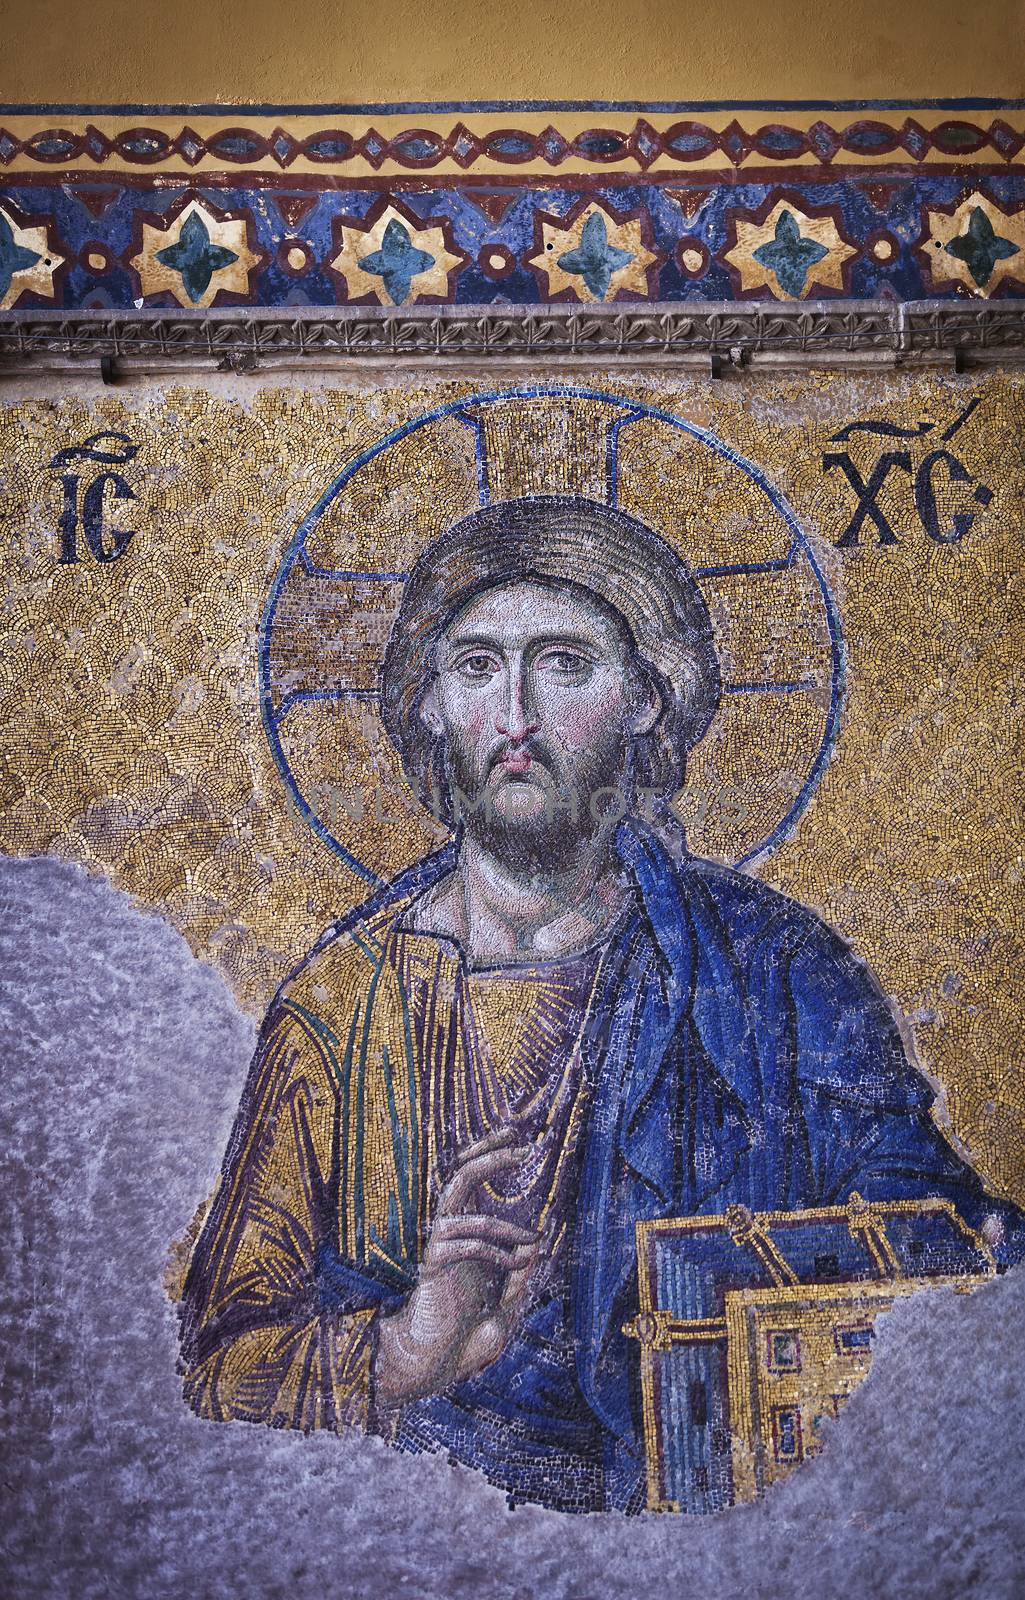 Detail of Jesus mosaic from the Hagia Sophia mosque in Istanbul